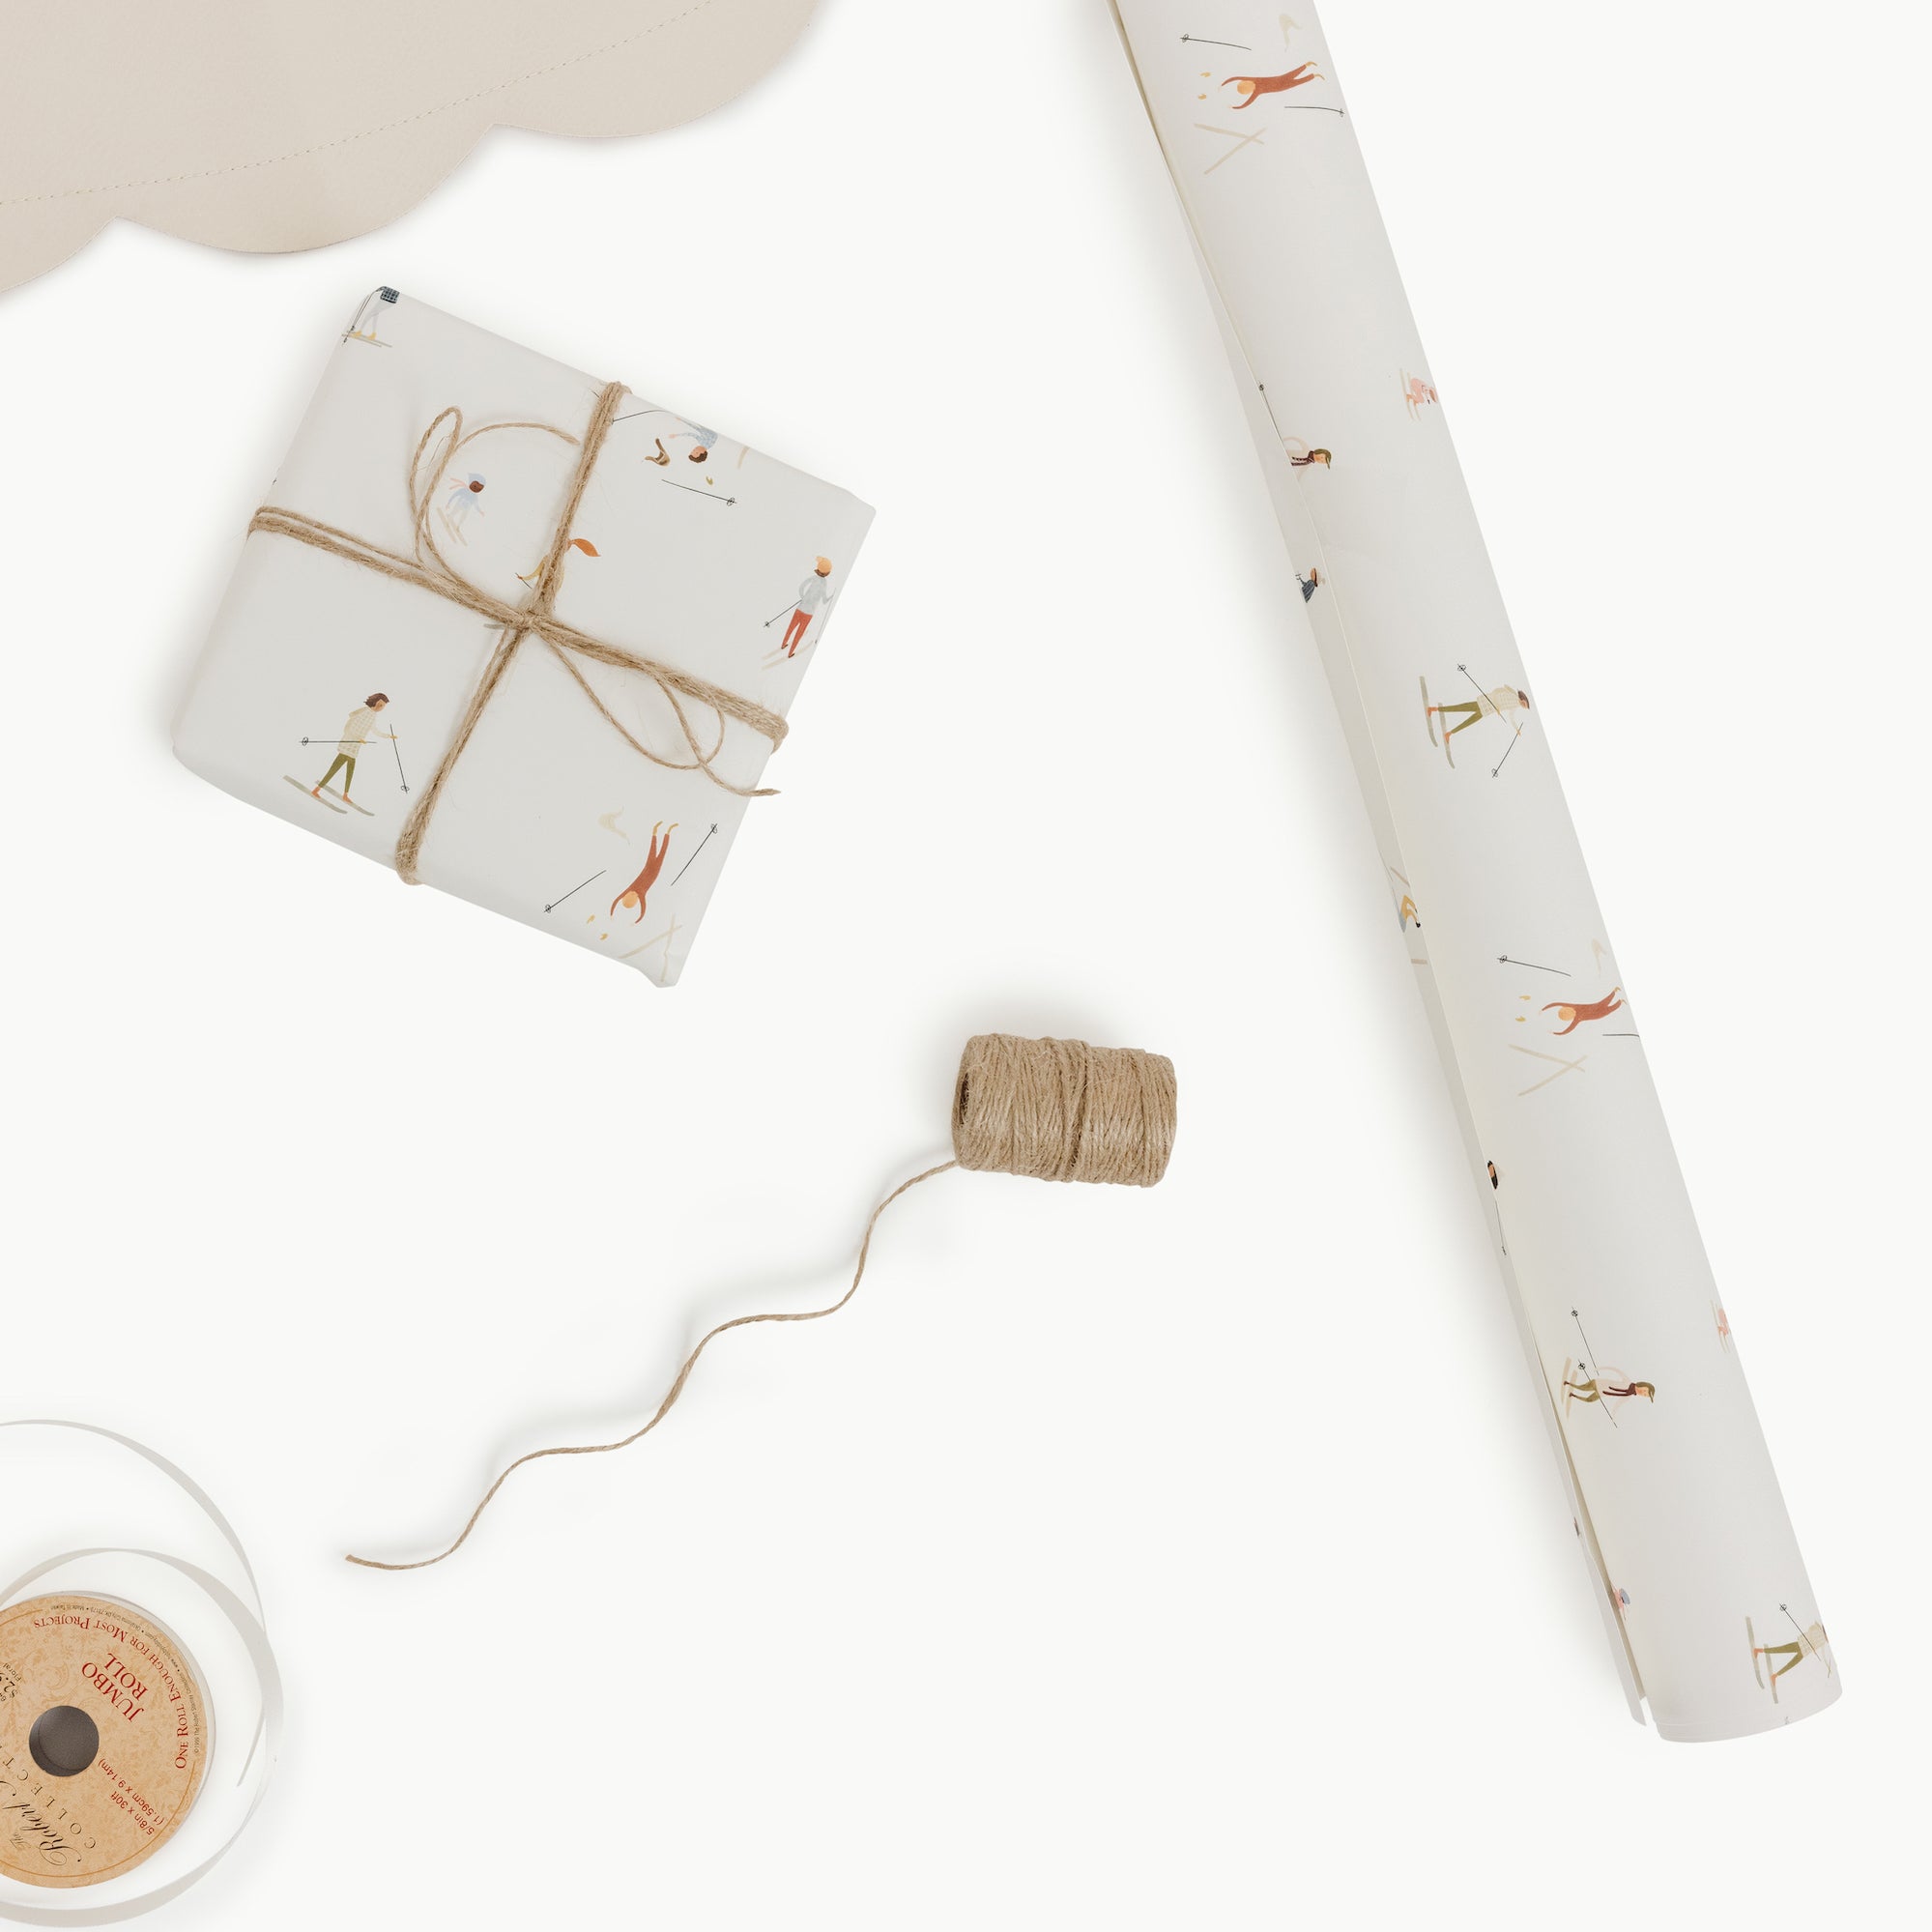 Nordic@flatlay image of nordic wrapping paper and wrapping supplies